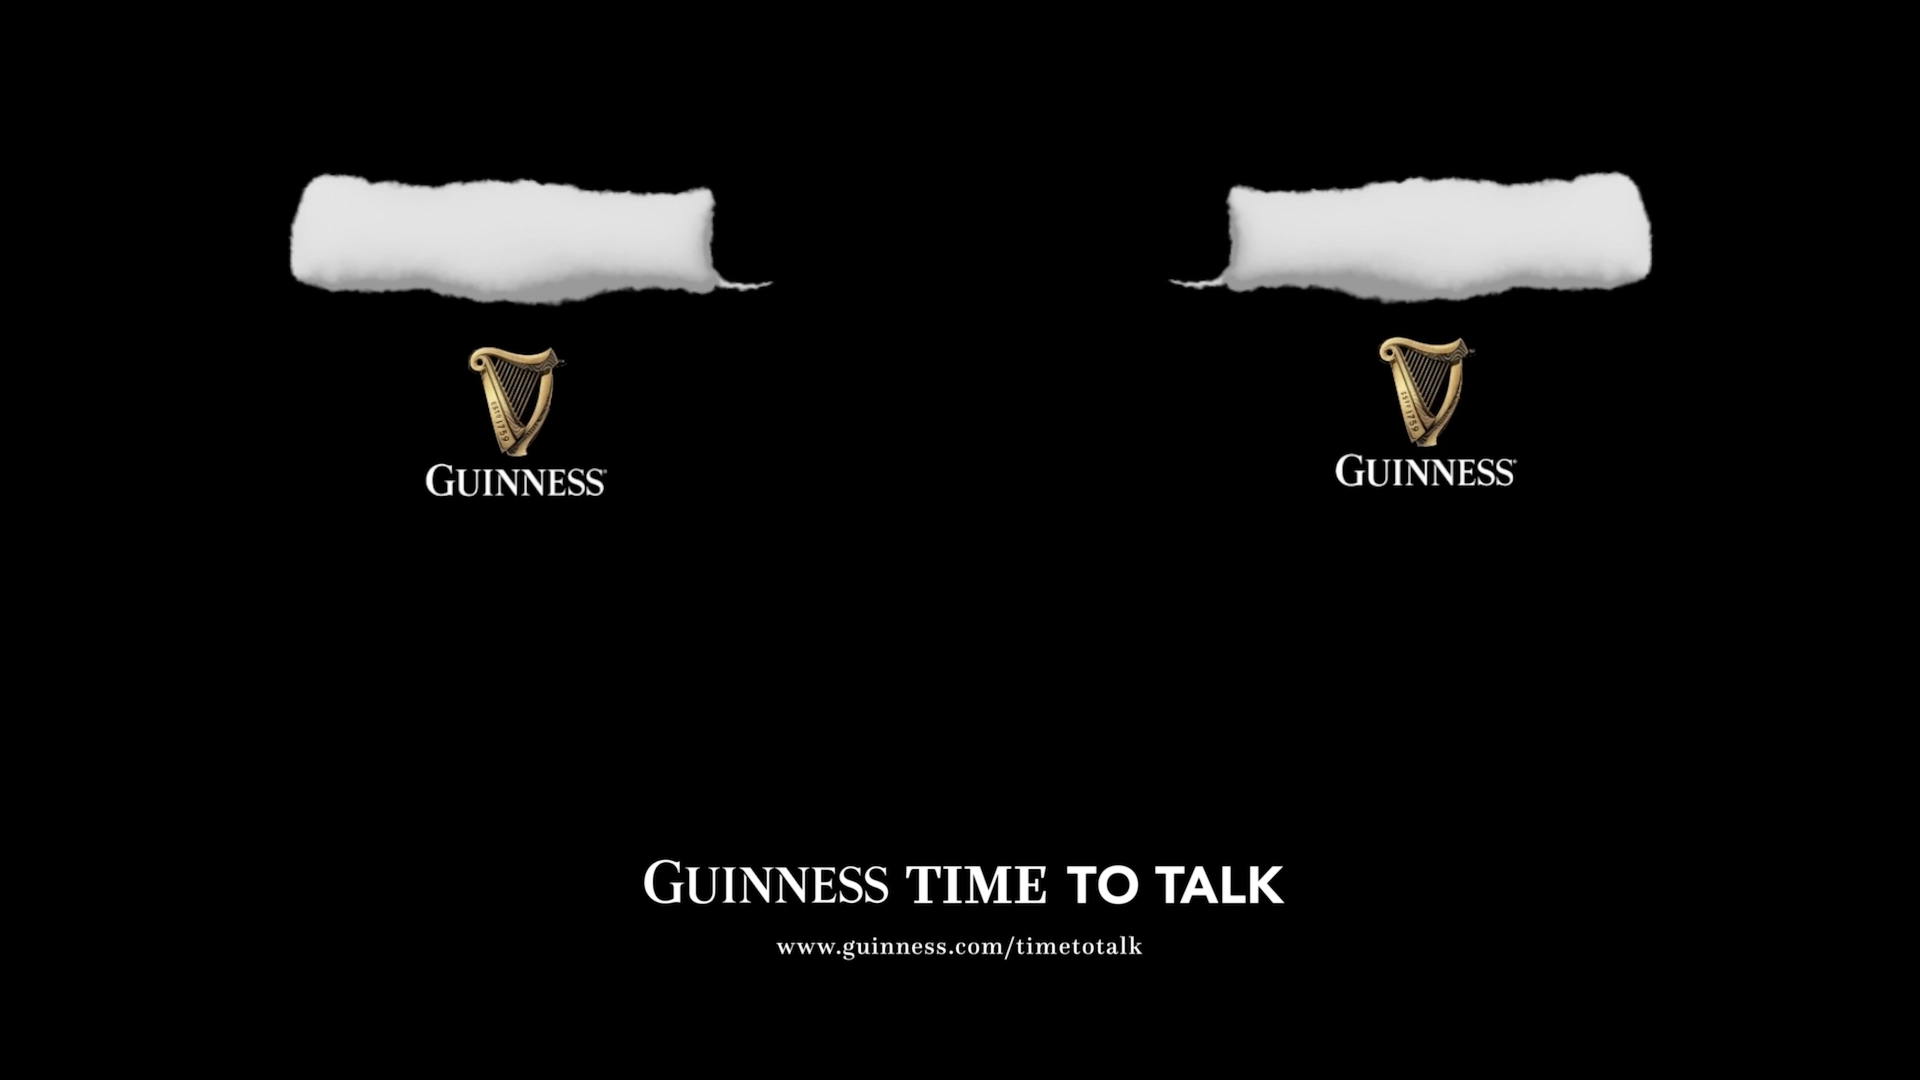 A 1 minute 10 second campaign video by Guinness encouraging people to put down their phones and interact with others in the 119 seconds it takes Guinness to settle. Thumbnail shows two white speechbubbles positioned to look like the top of a guinness drink.